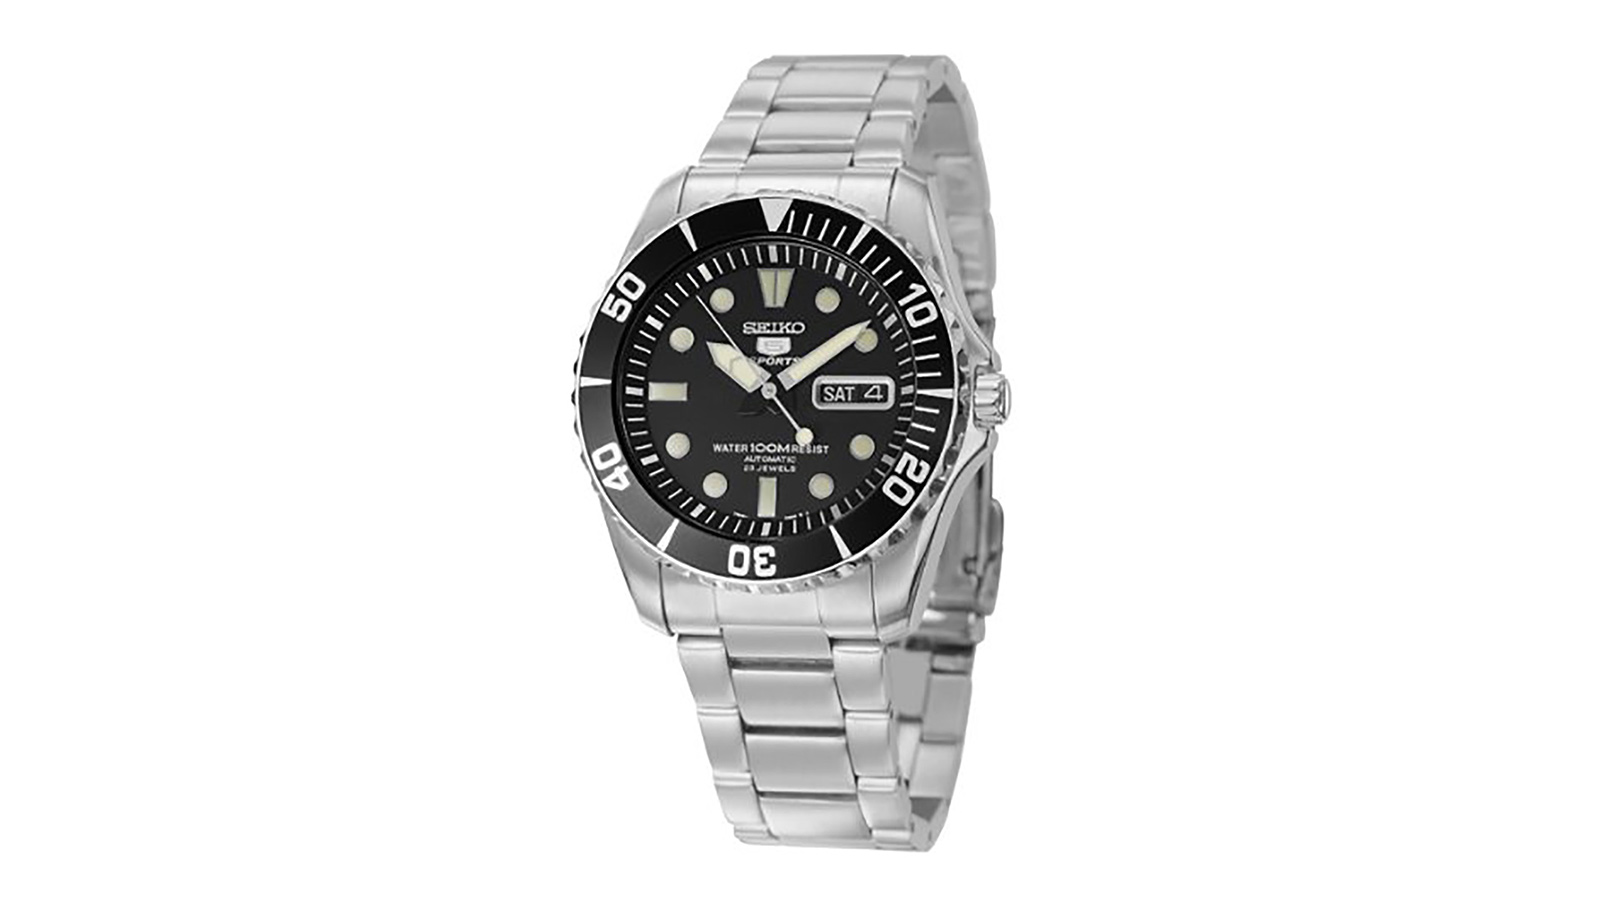 Seiko Men's SNZF17J1 5 Sports Automatic Stainless Steel Watch | the best men's watches under $200